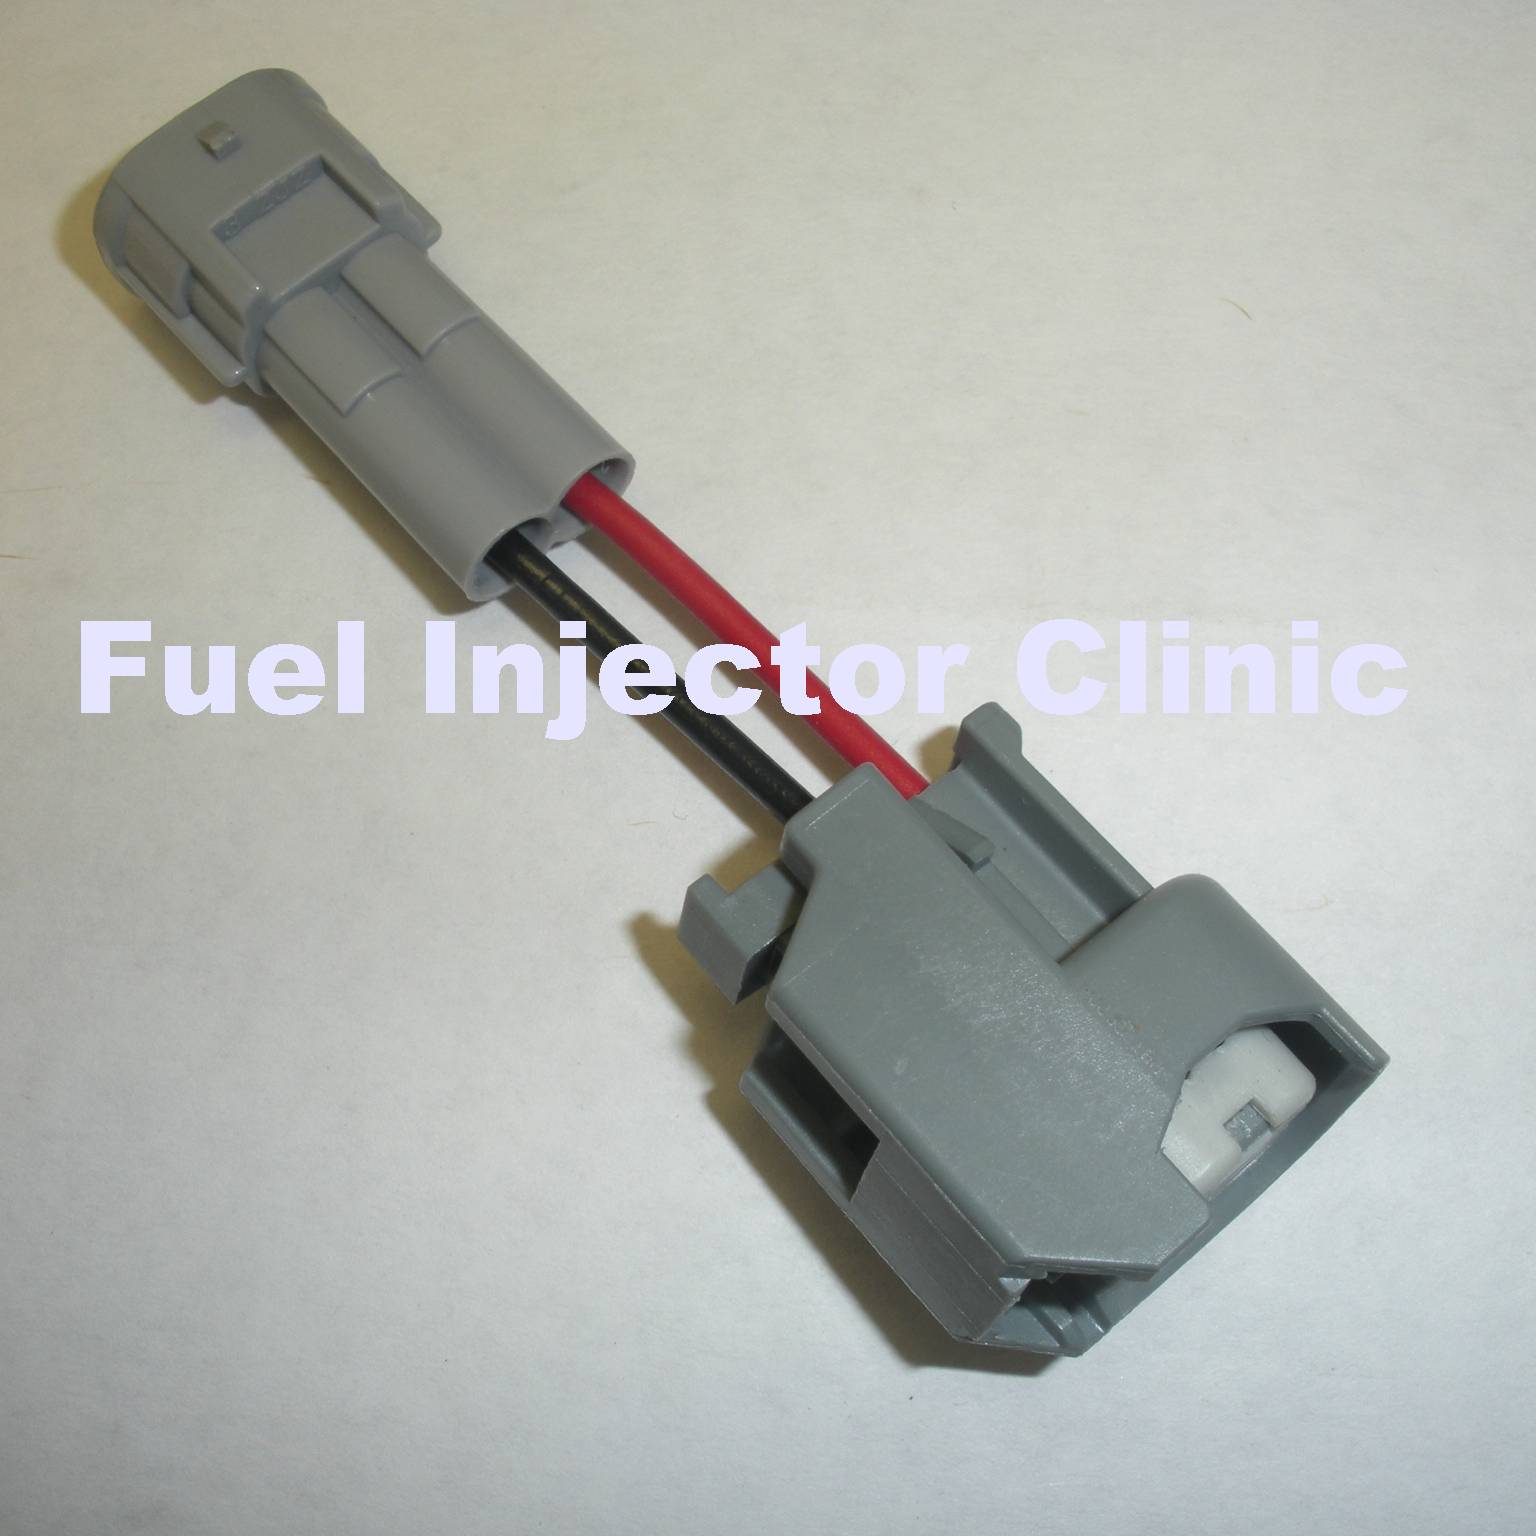 Fuel Injector Clinic Jetronic/EV1 to Toyota plug adaptors - Click Image to Close